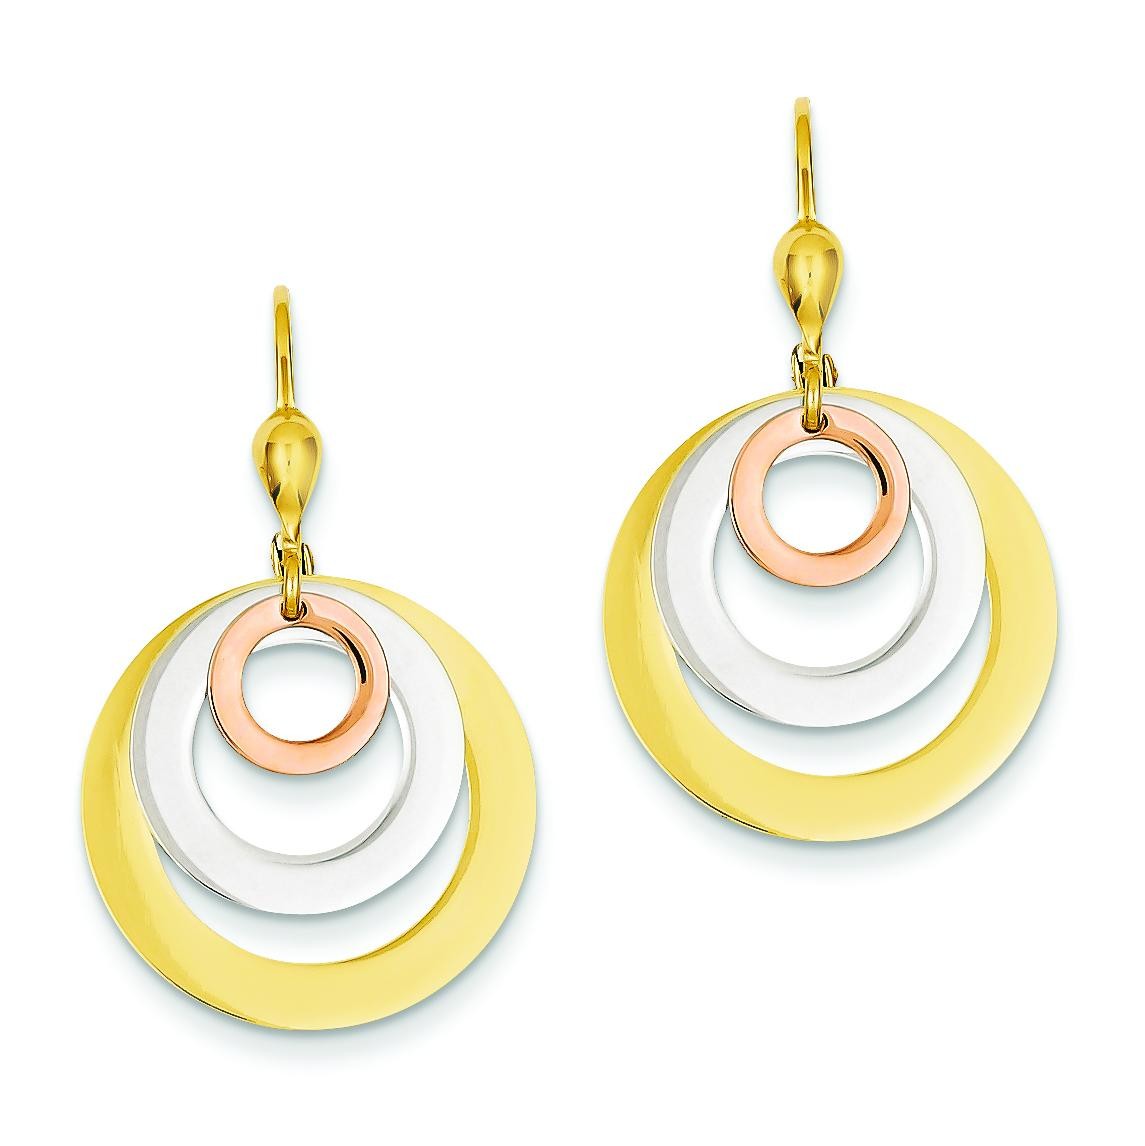 Tricolor Circle Leverback Dangle Earrings in 14k Tri-color Gold